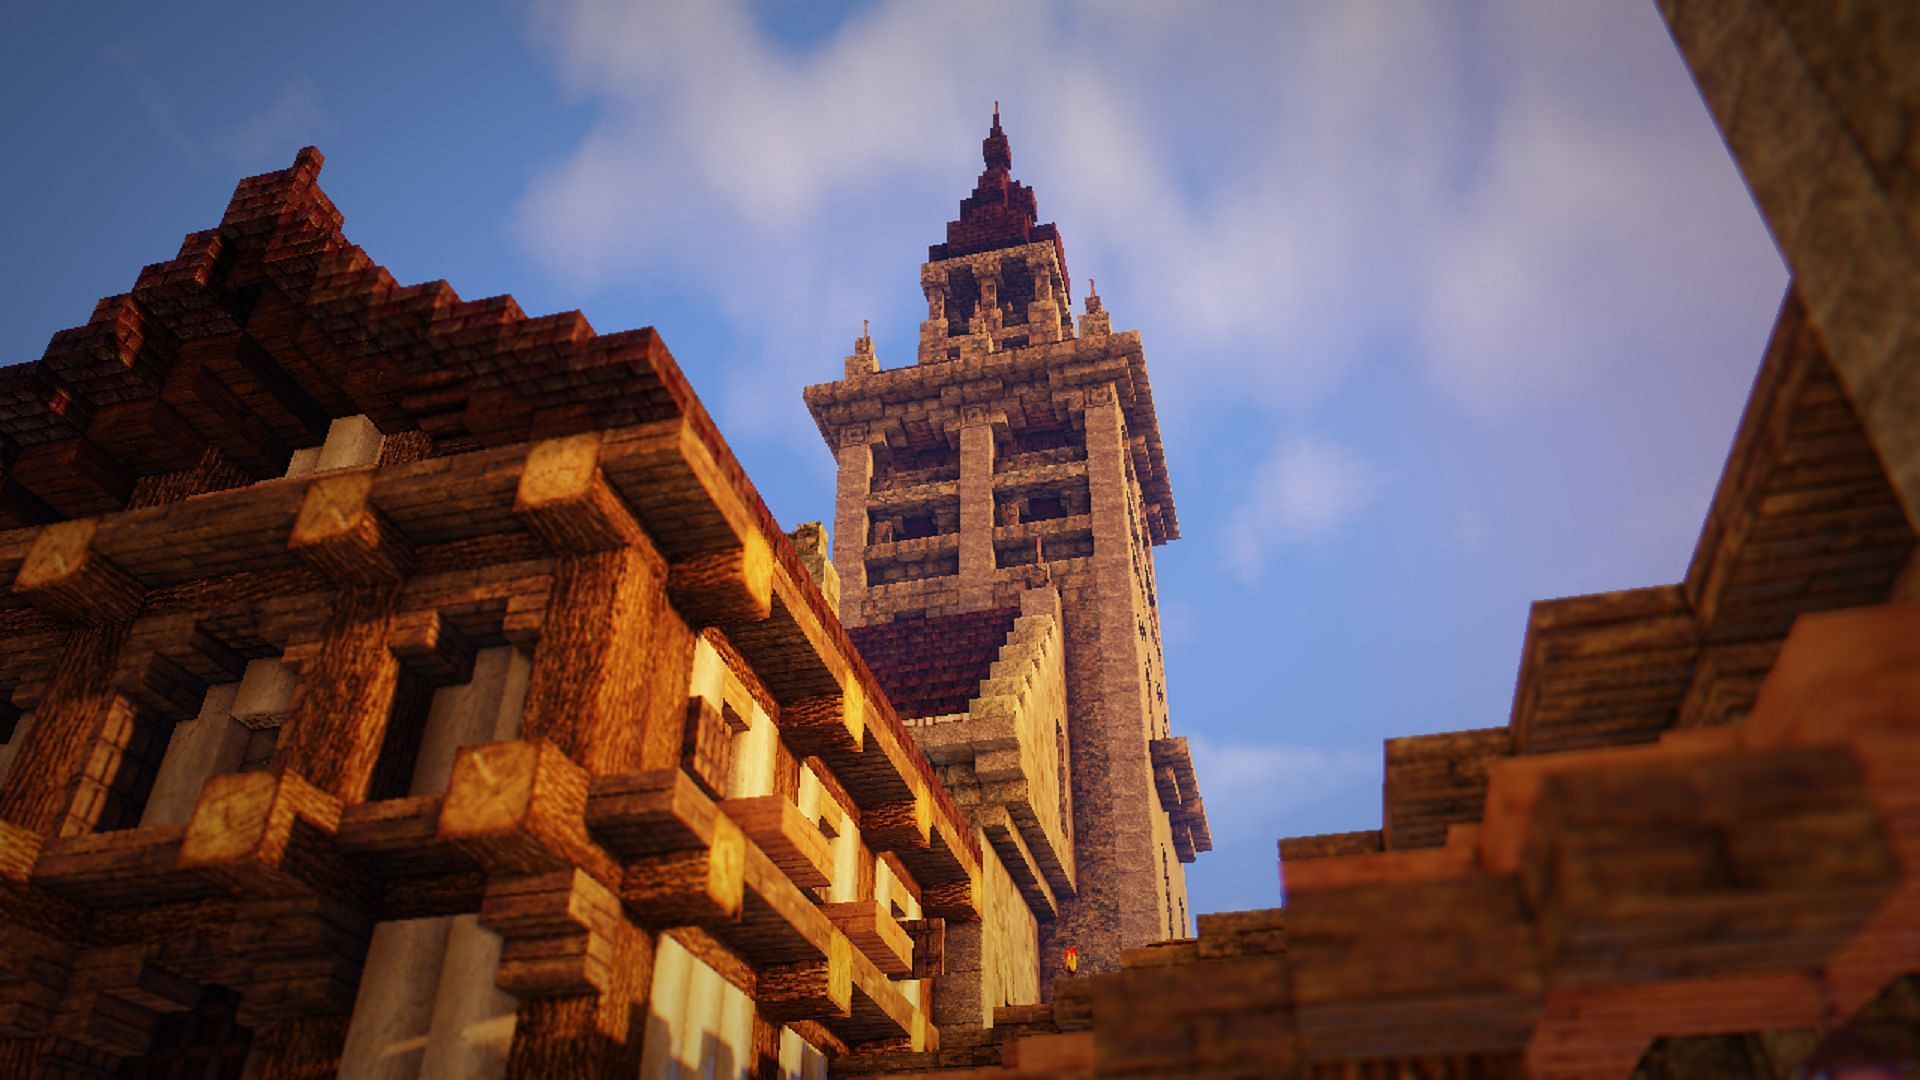 RedHat Shaders hit an excellent blend between realism in fantasy within Minecraft (Image via Mlgimposter/CurseForge)